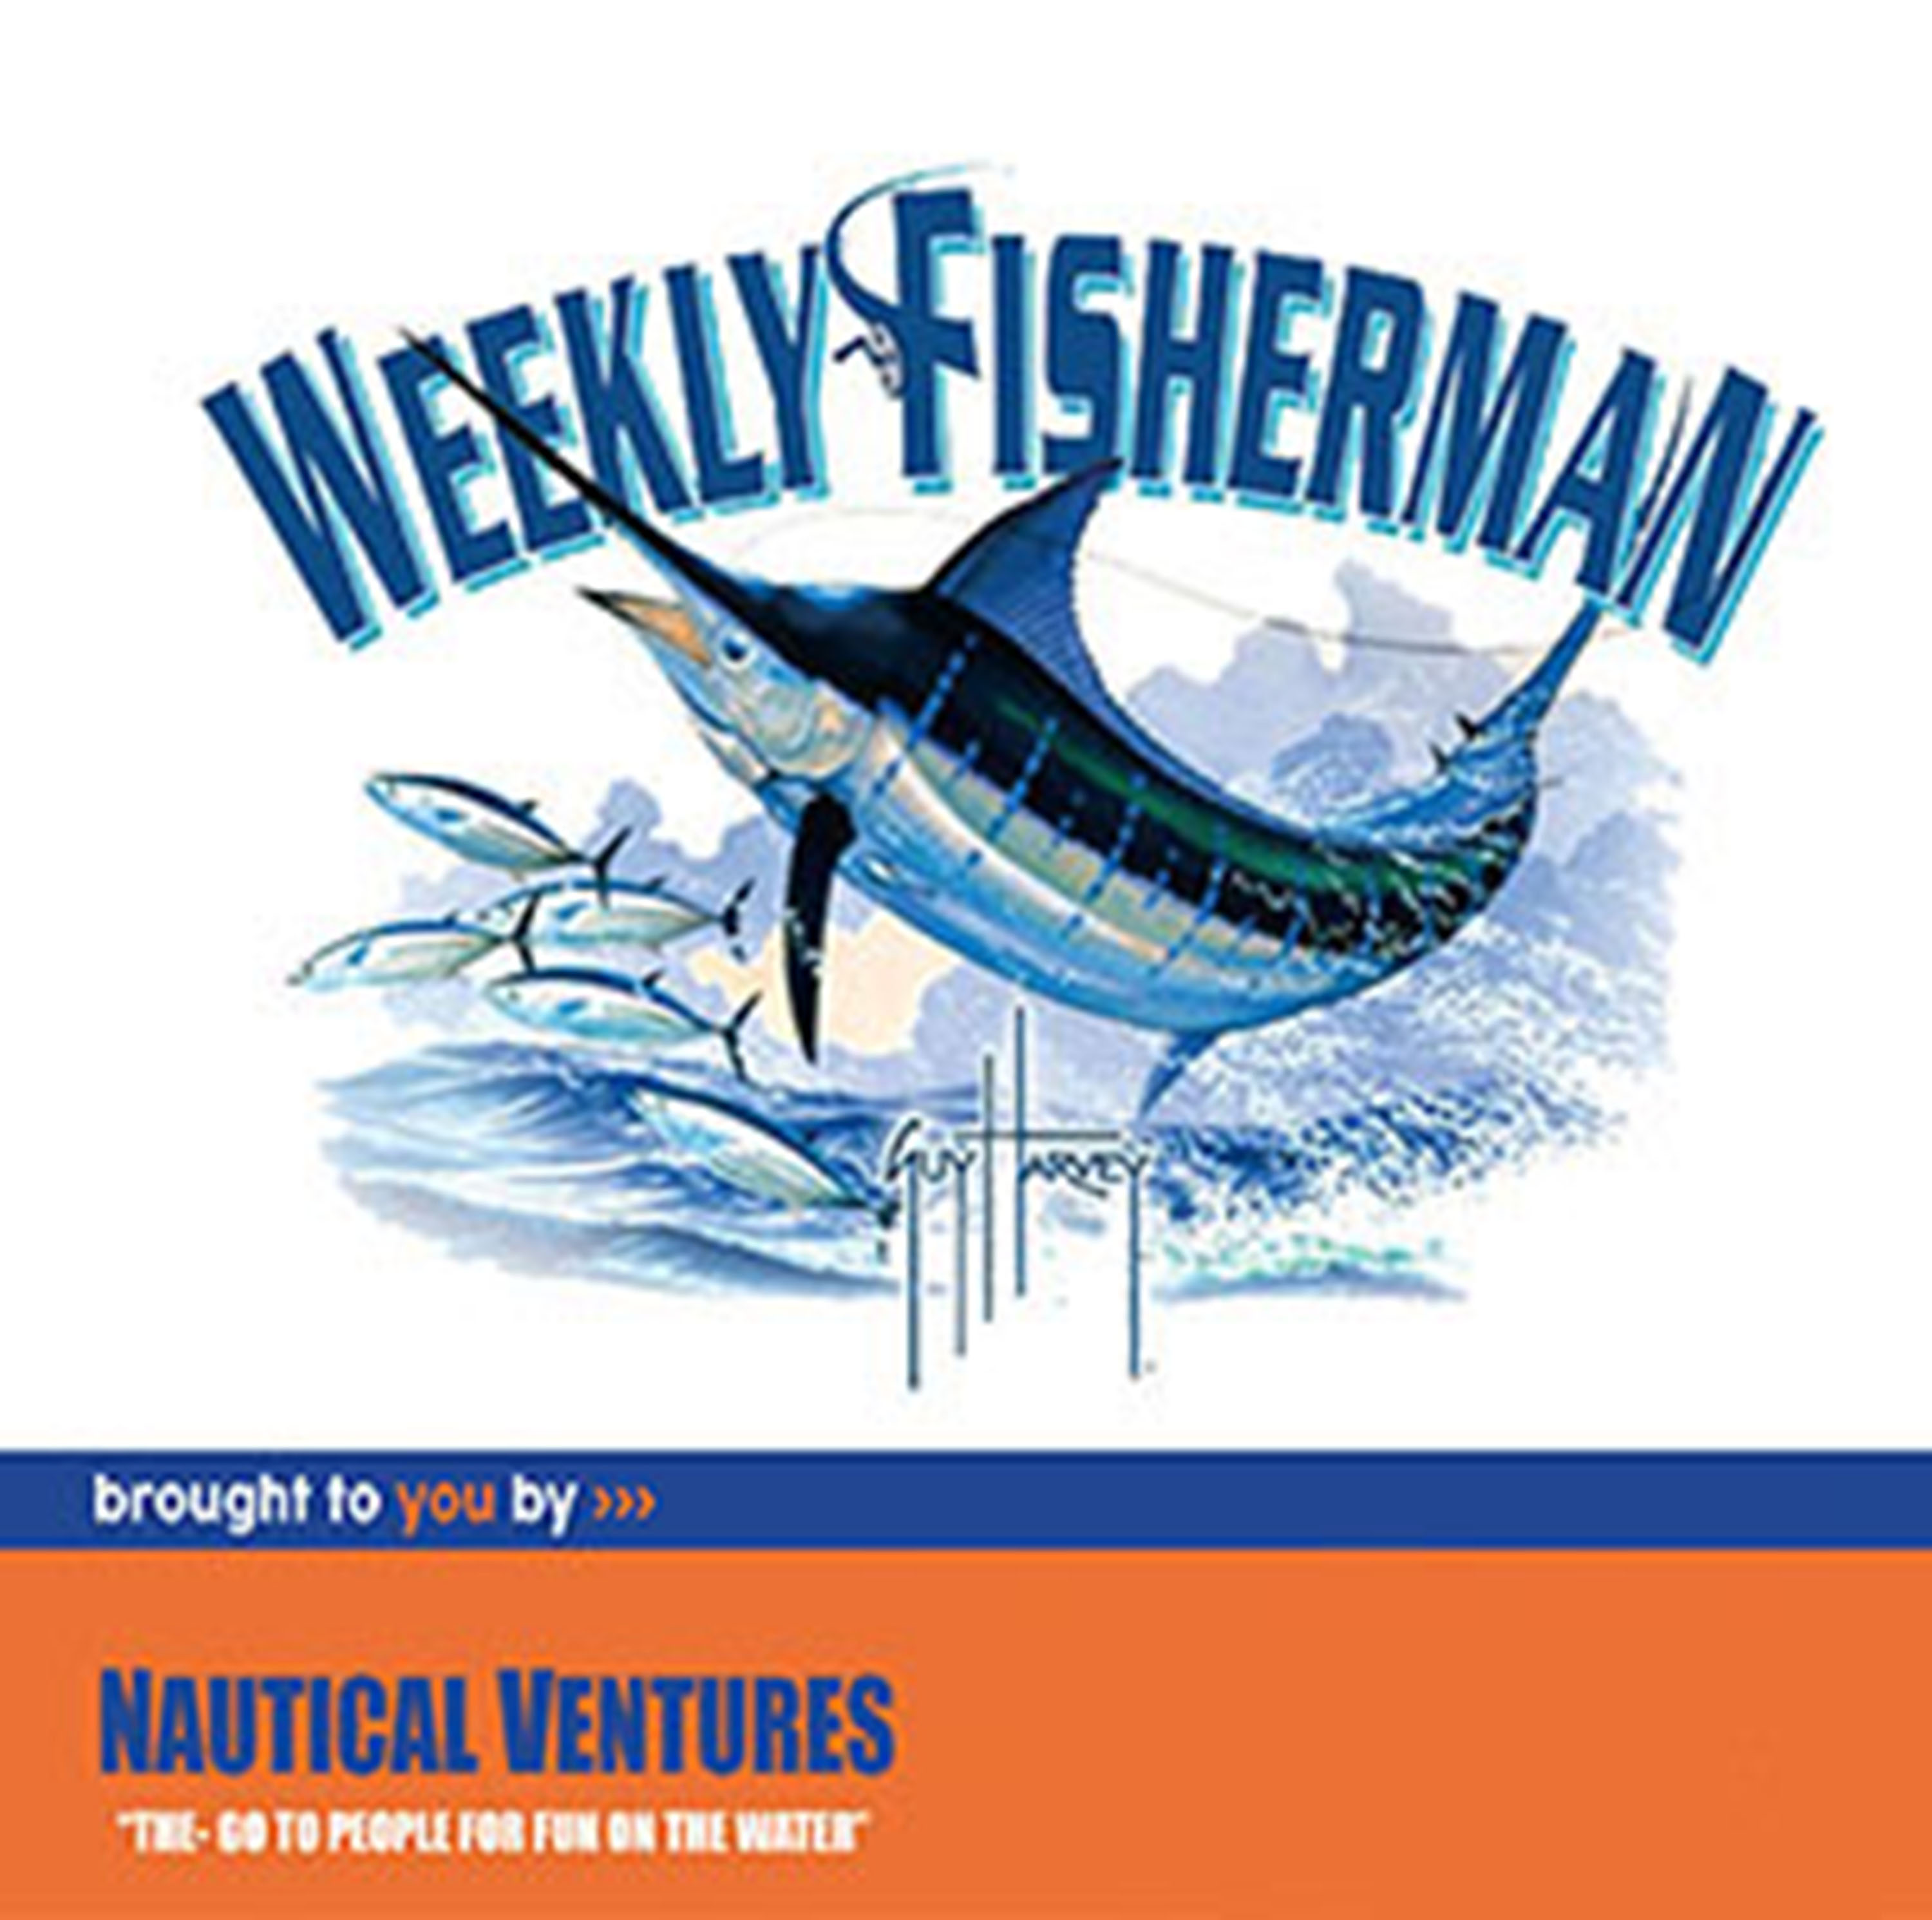 The Weekly Fisherman Show Podcast 06-25-16